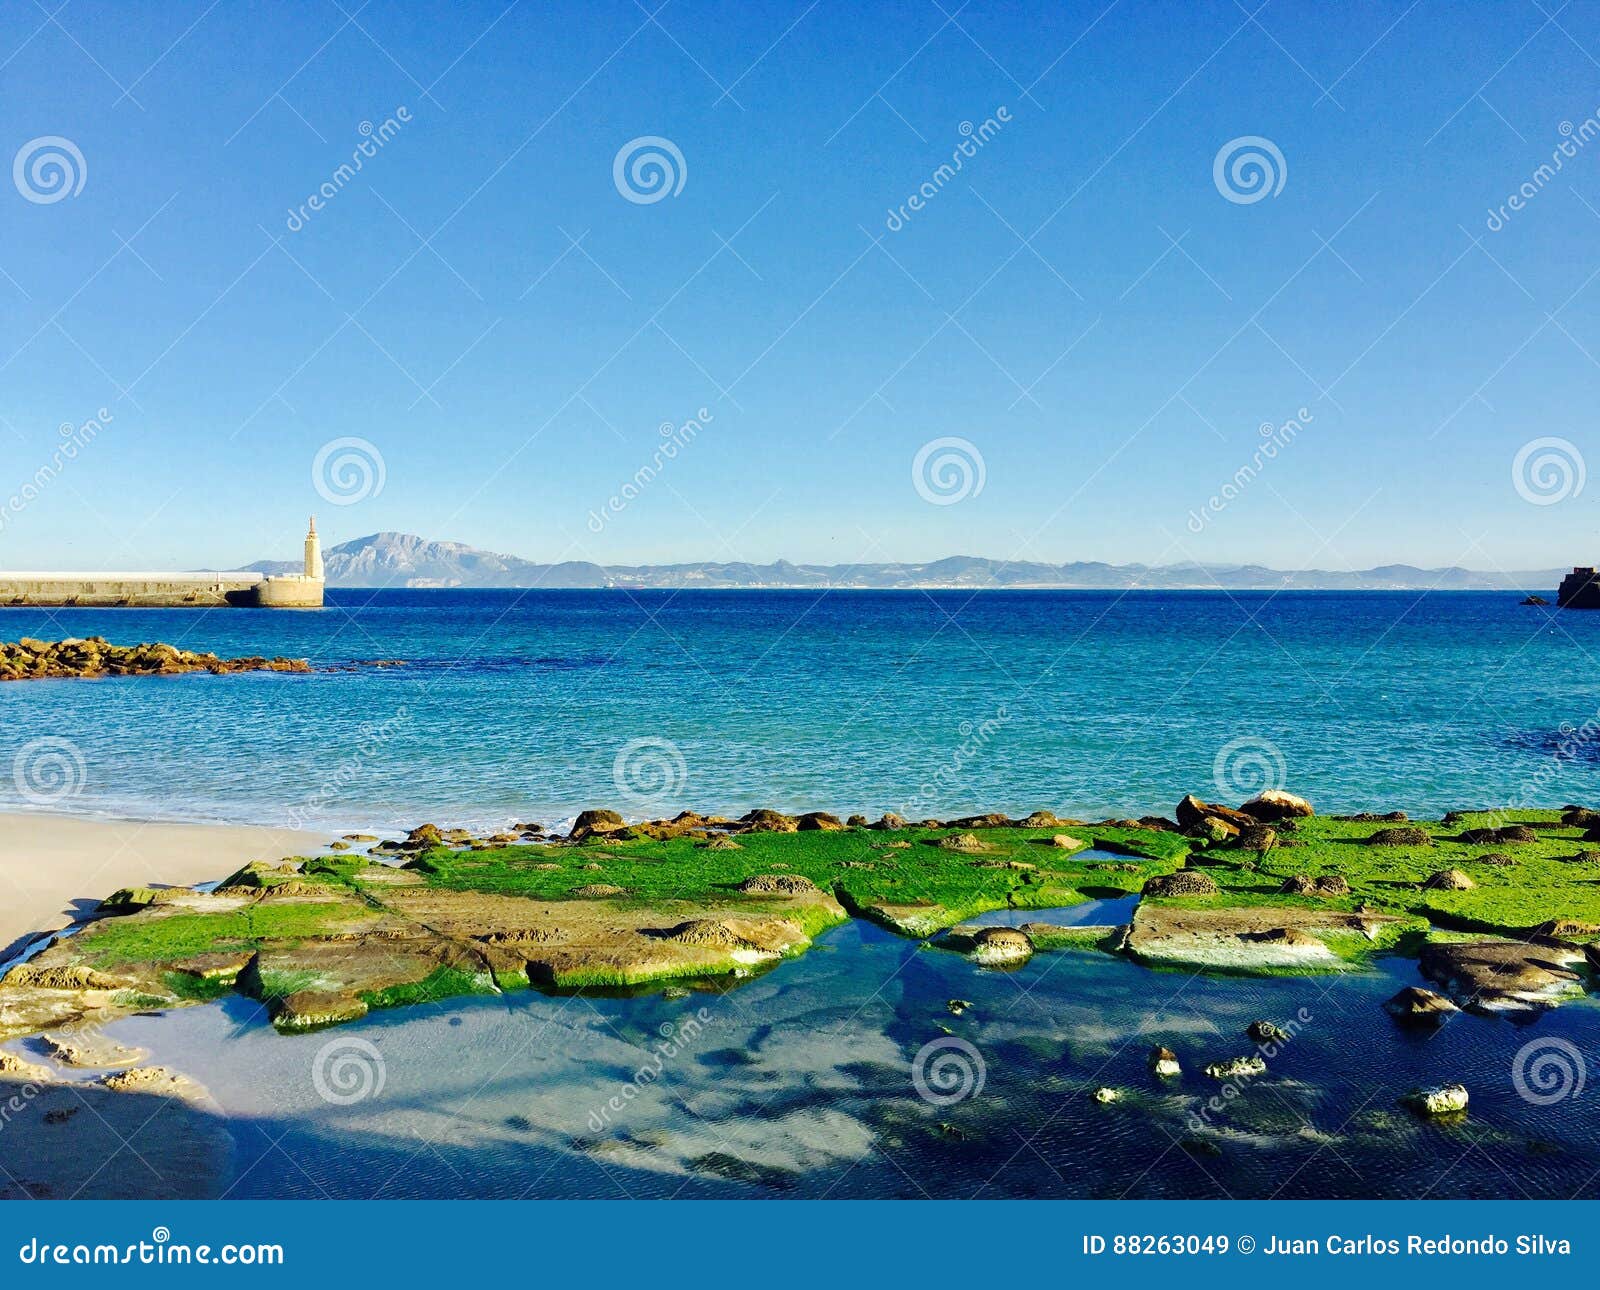 water sea beach continents spring